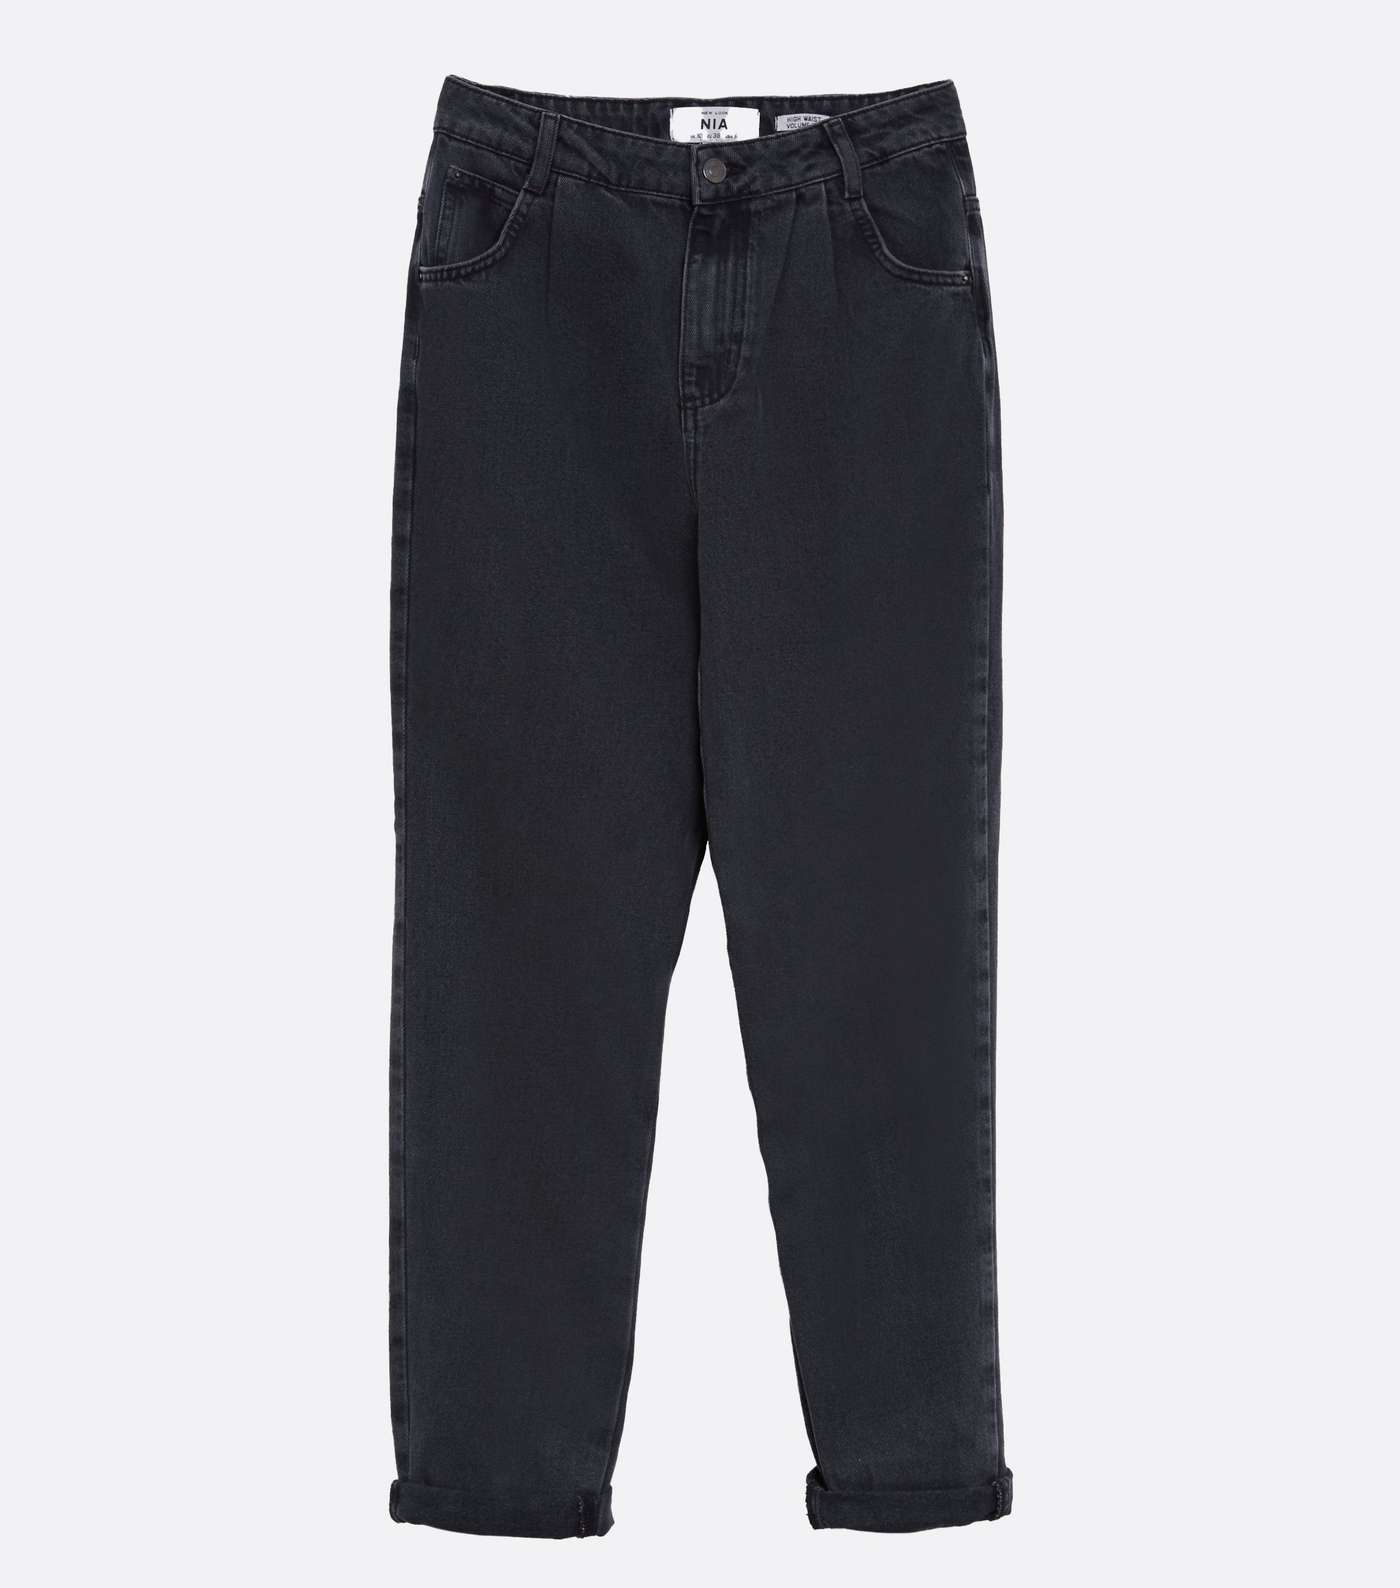 Black Slouch Nia Balloon Jeans  Image 5